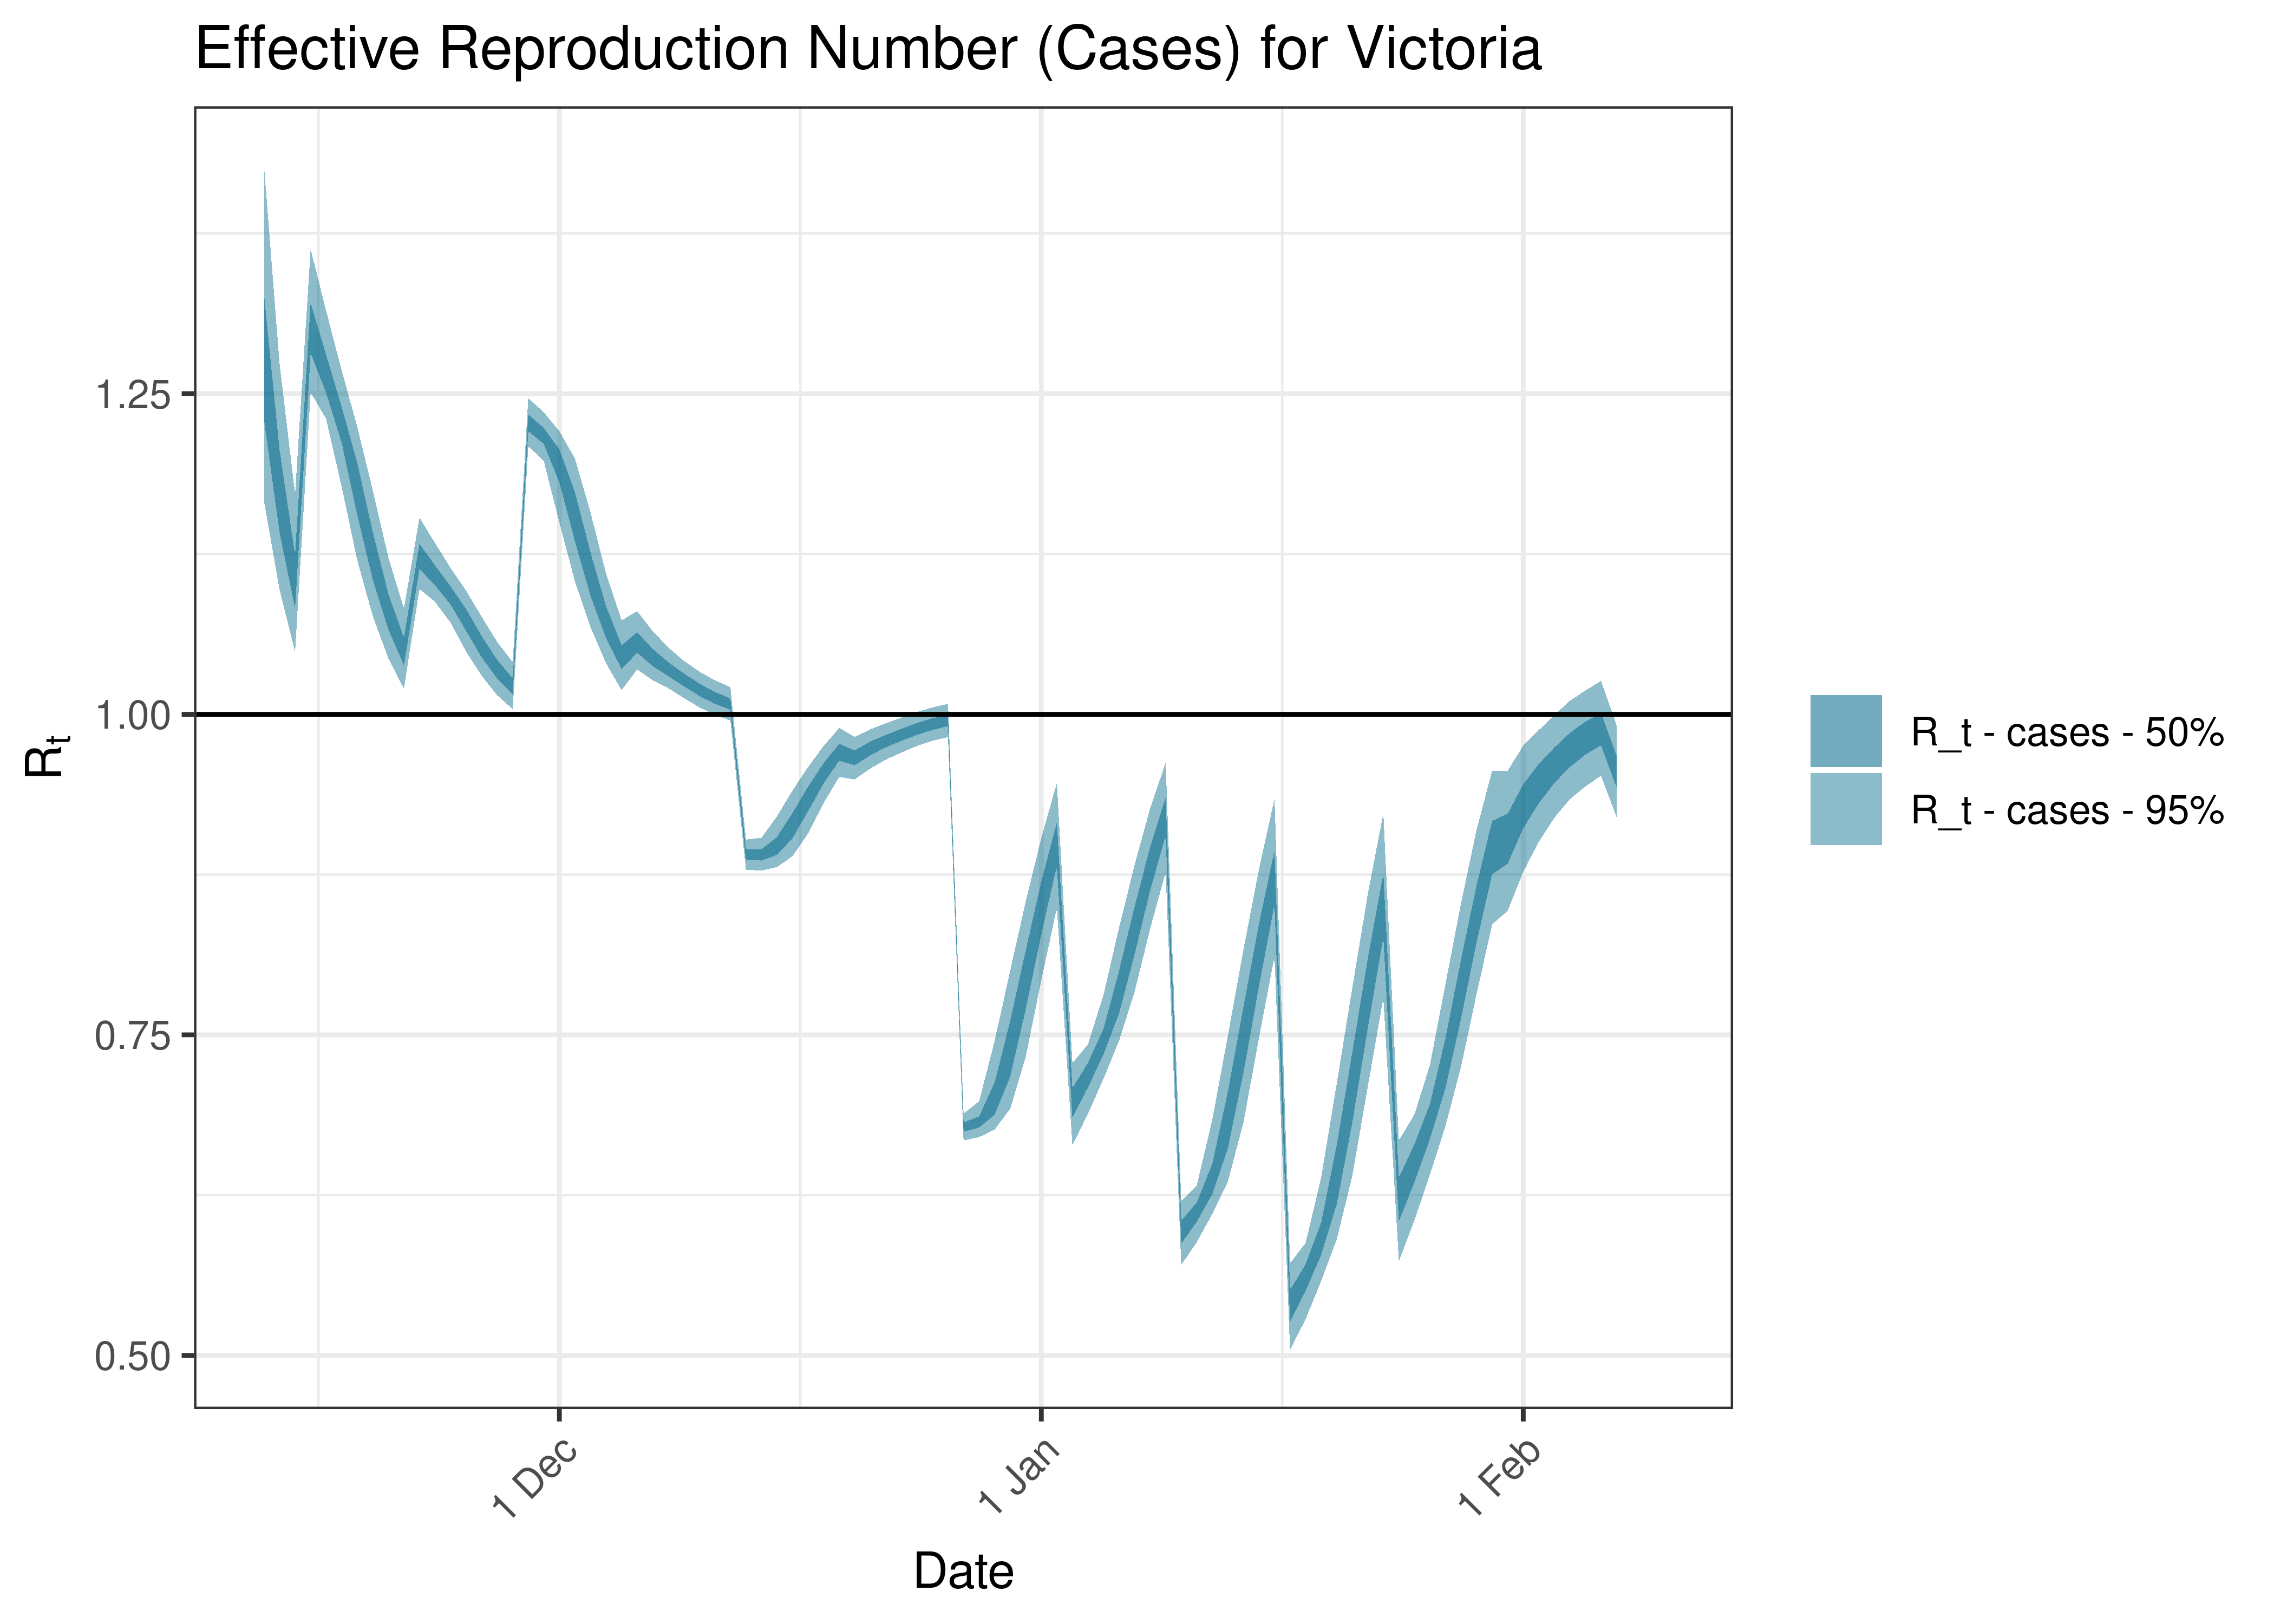 Estimated Effective Reproduction Number Based on Cases for Victoria over last 90 days